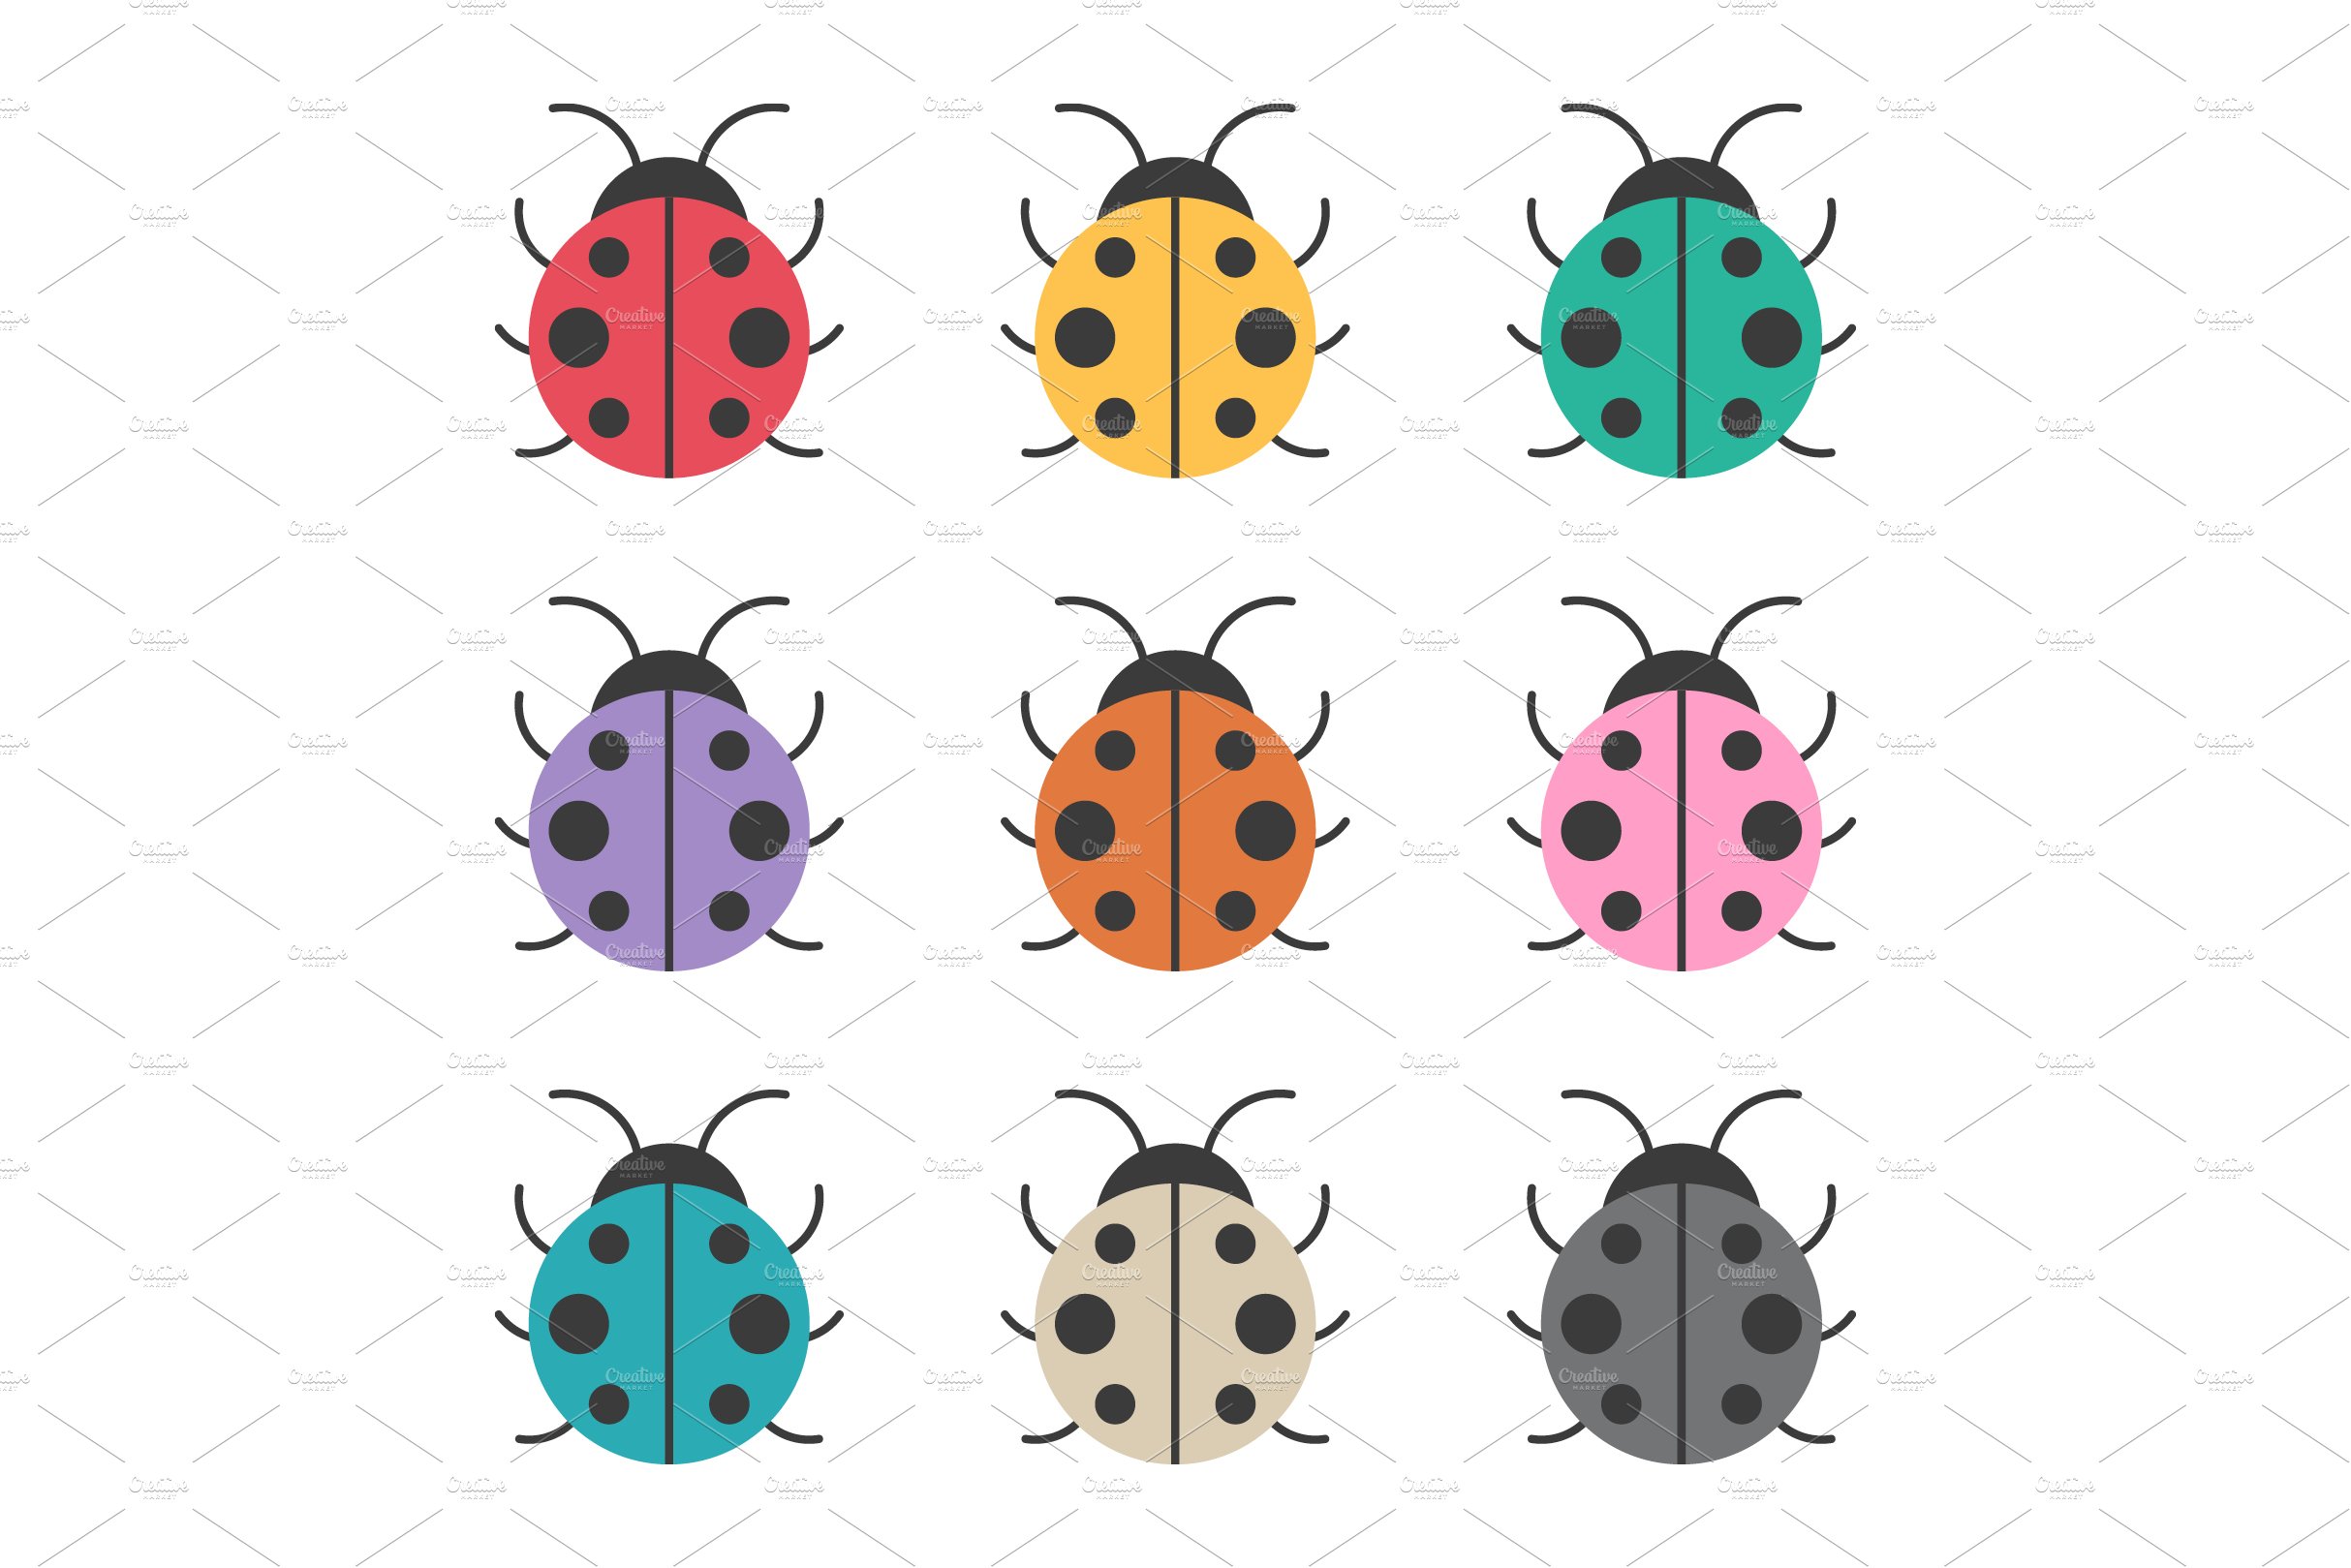 Ladybugs preview image.